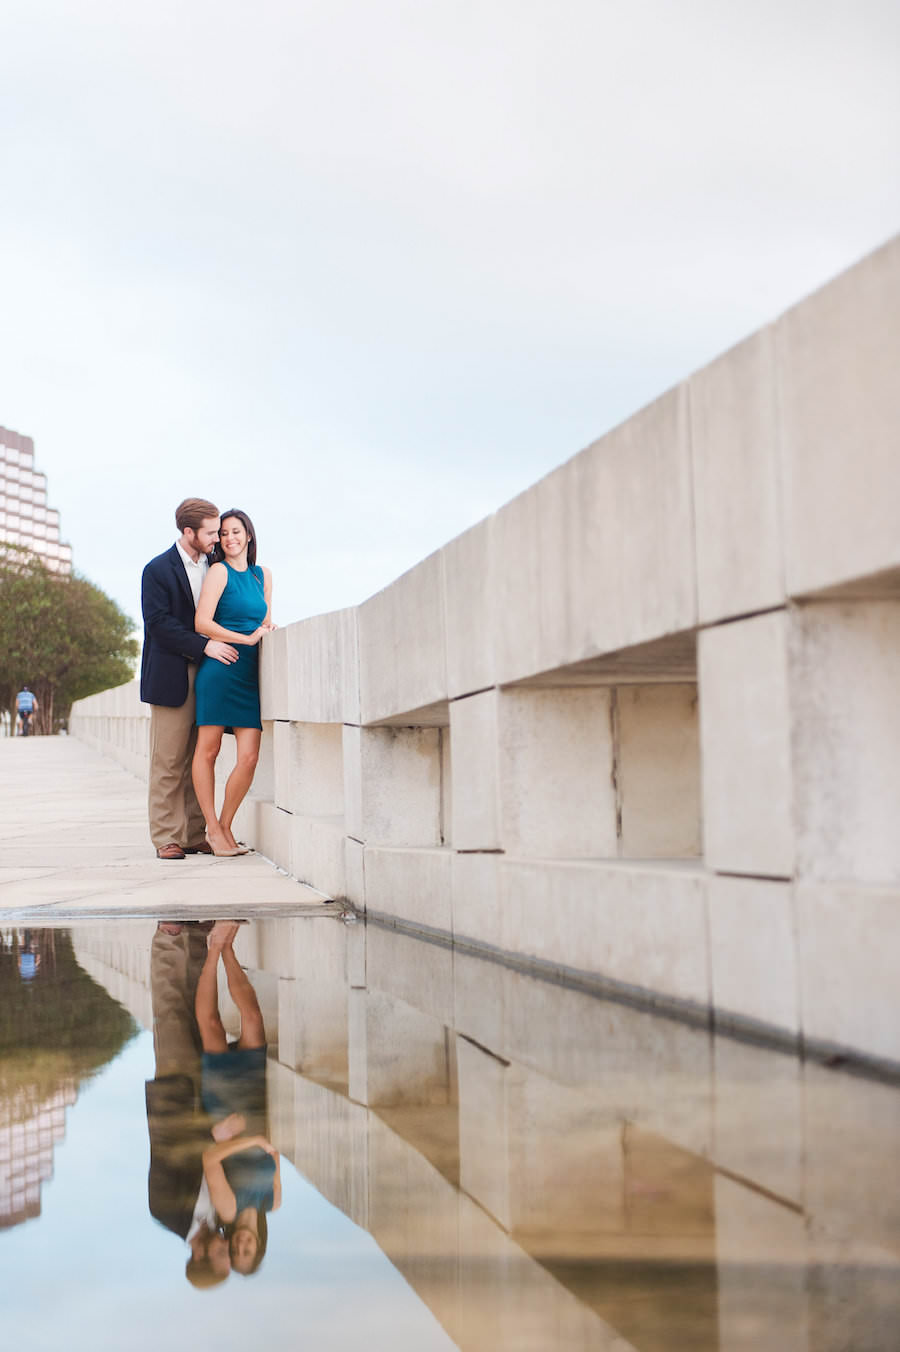 Outdoor, Downtown Tampa Engagement Photography Session with Reflection | Marc Edwards Photographs